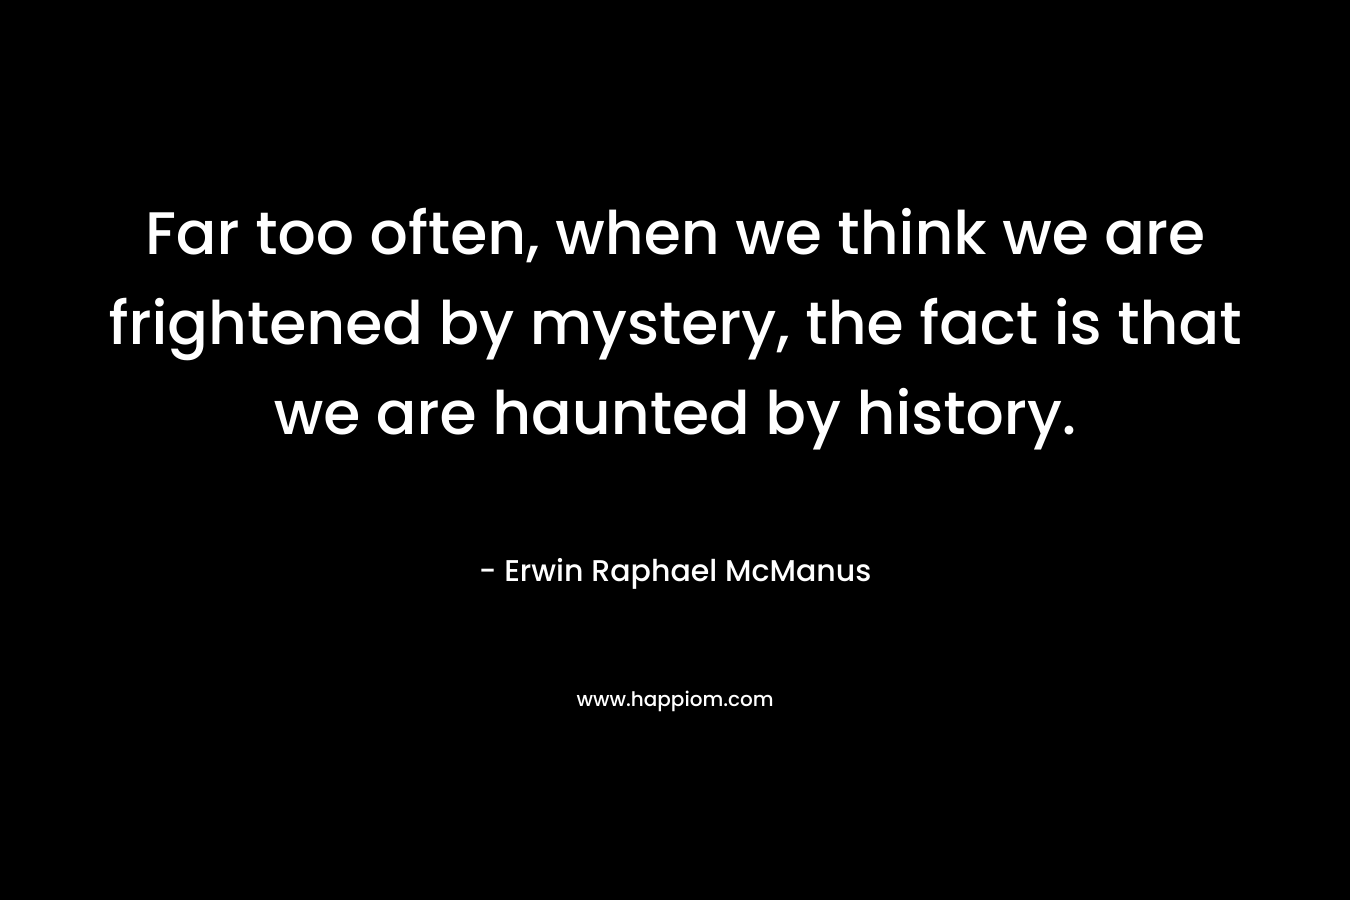 Far too often, when we think we are frightened by mystery, the fact is that we are haunted by history.